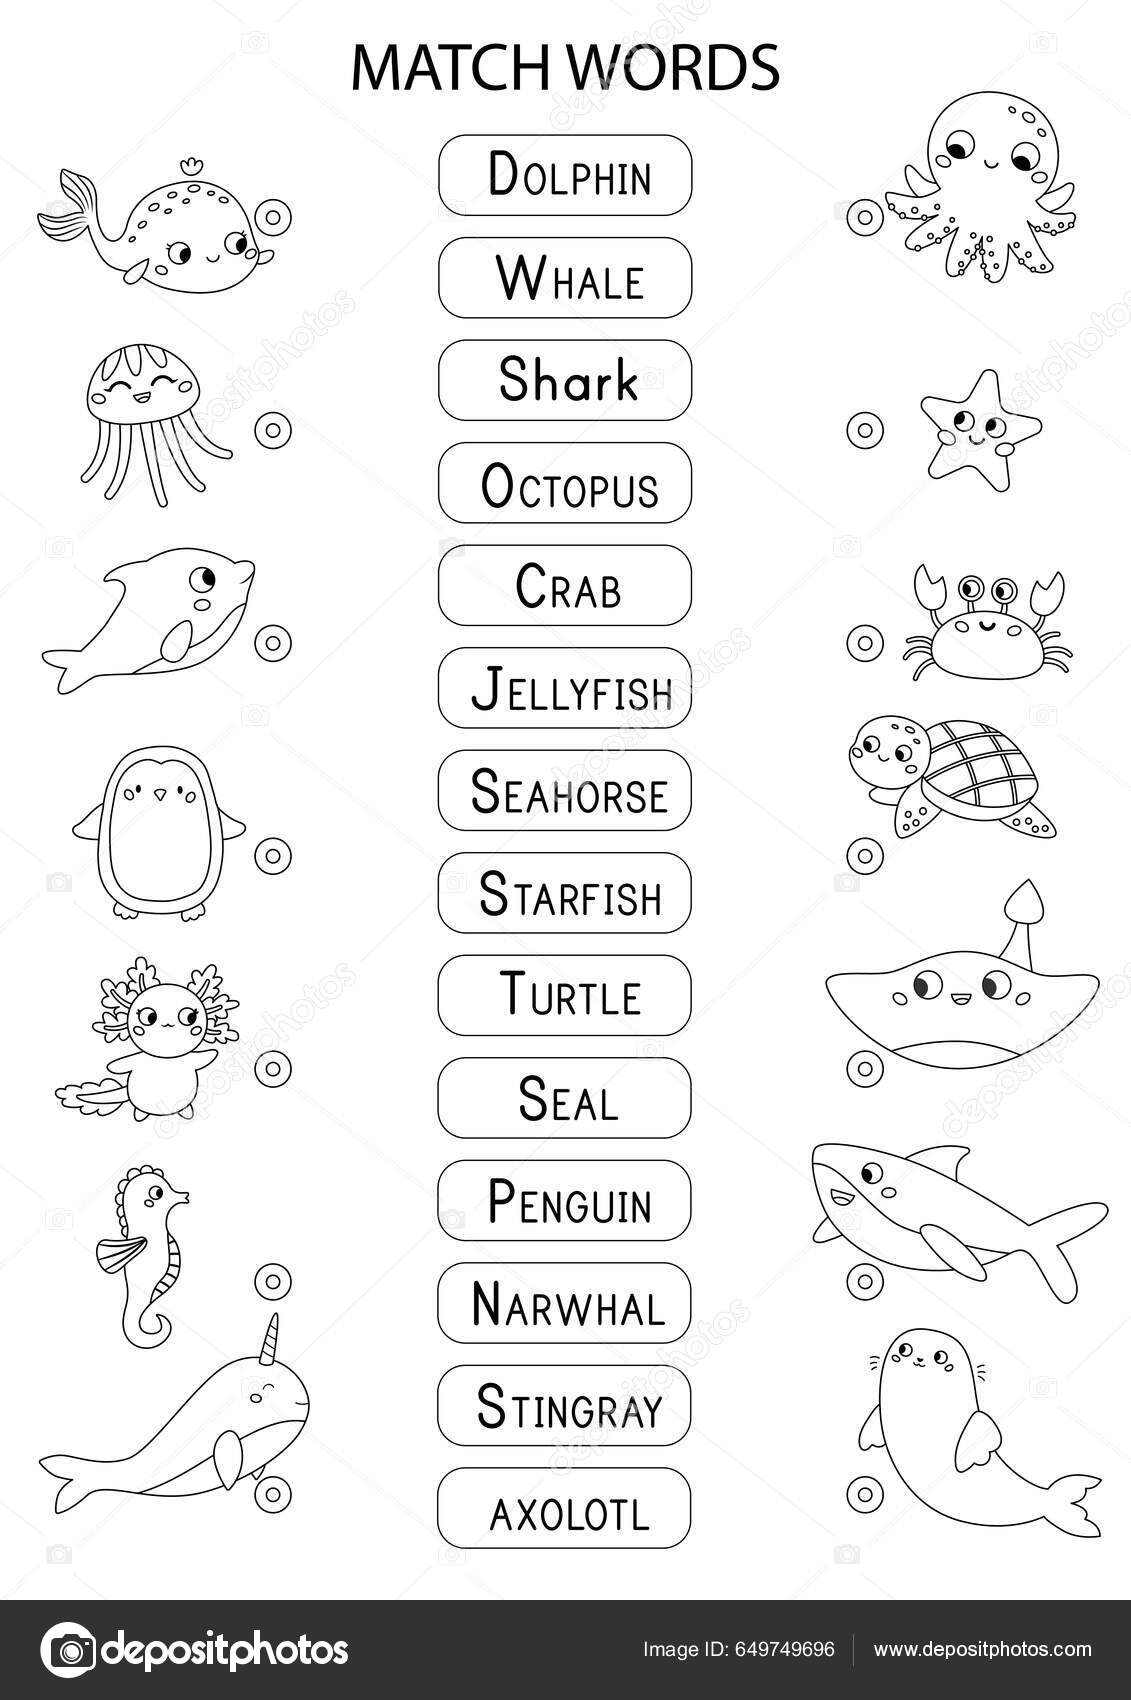 Match words correct pictures coloring page cute sea ocean animals stock vector by kristina